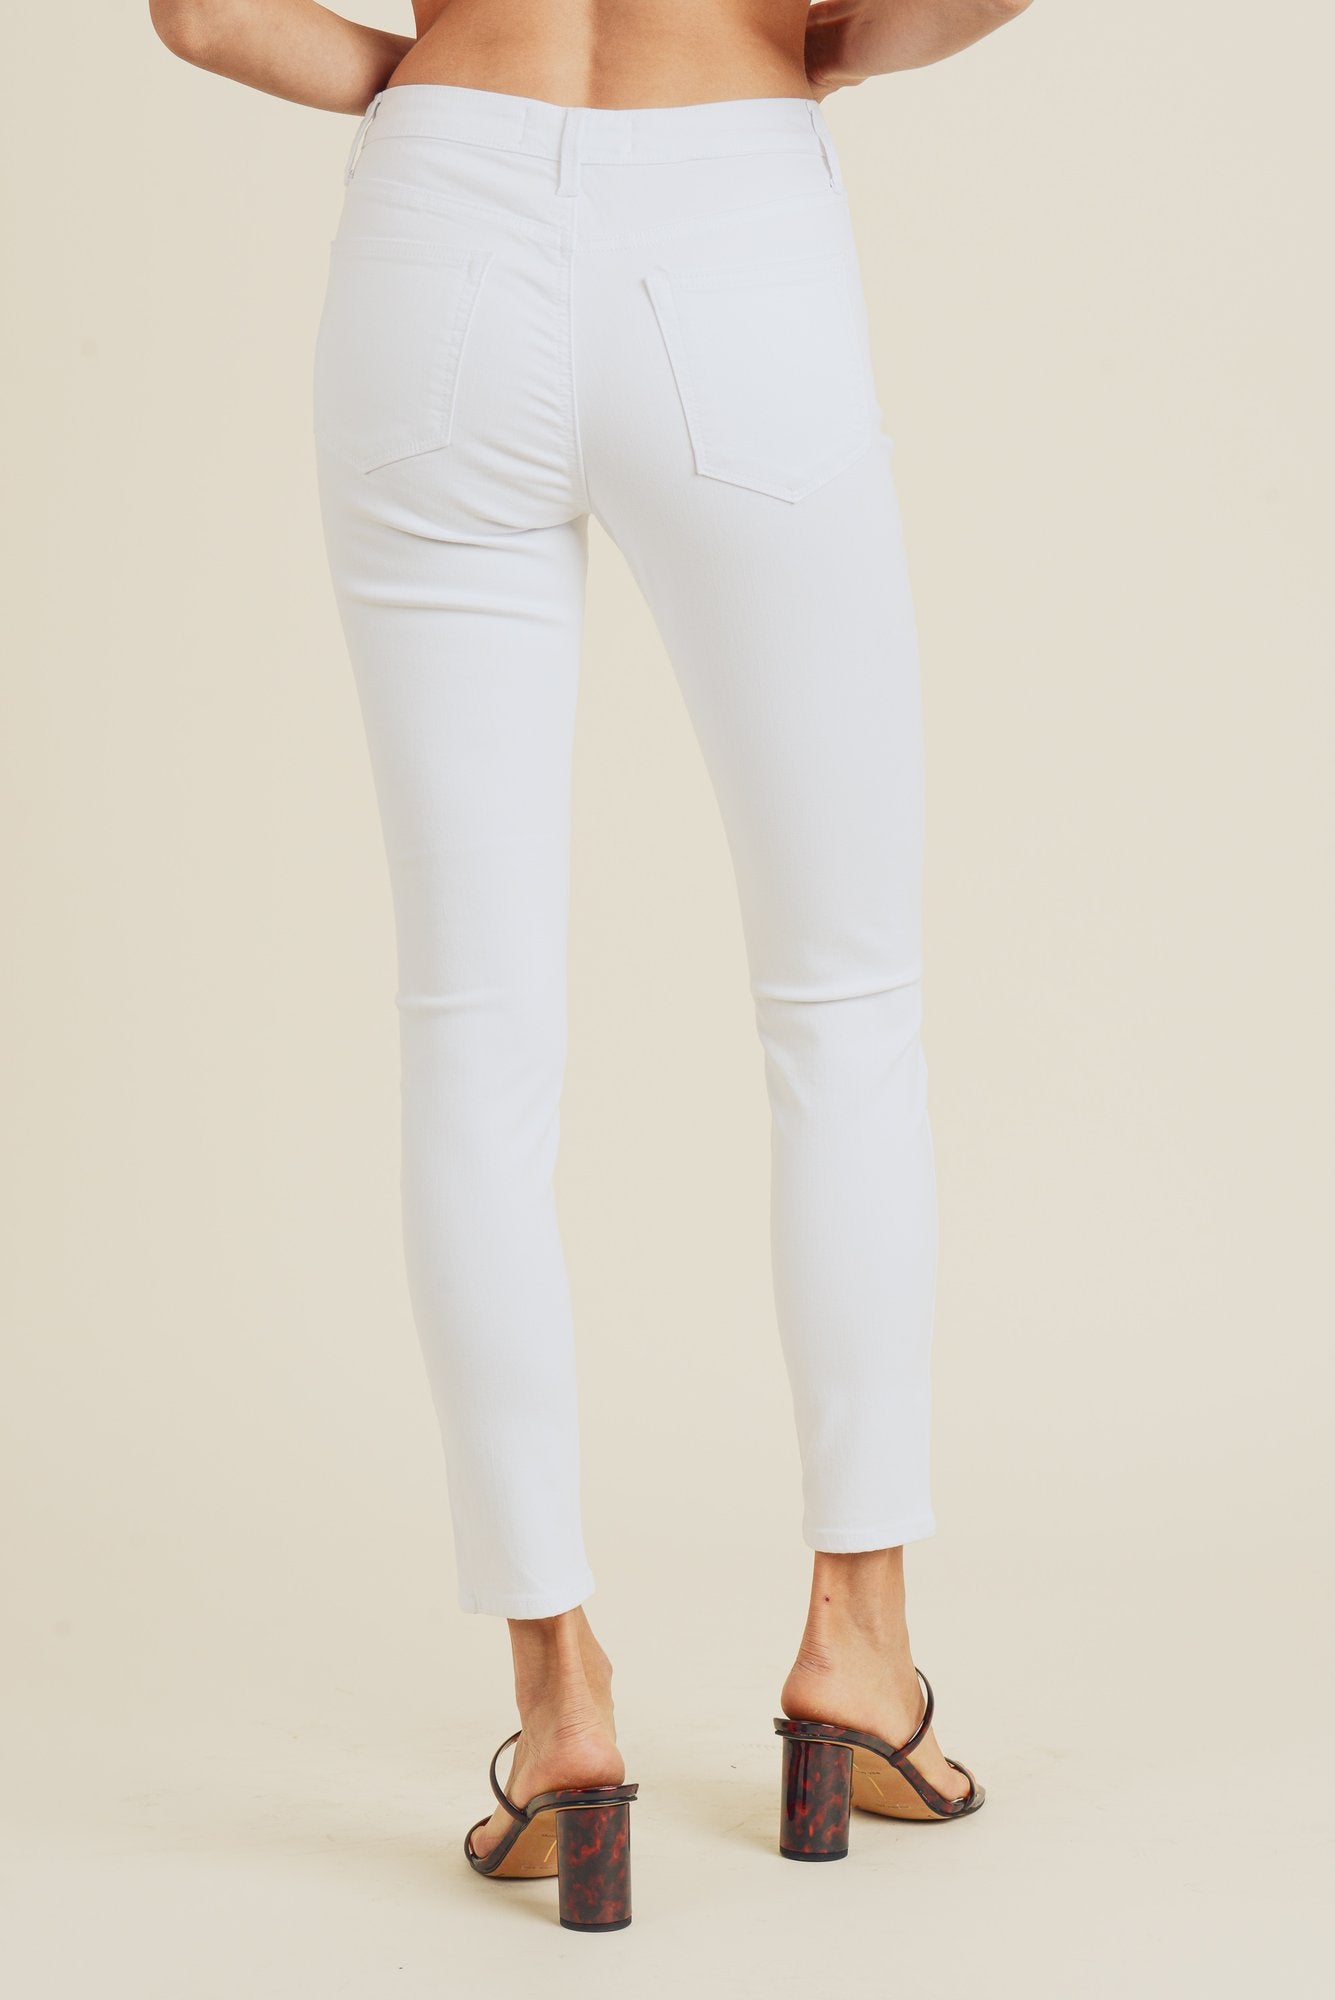 High Rise Button Fly White Jeans